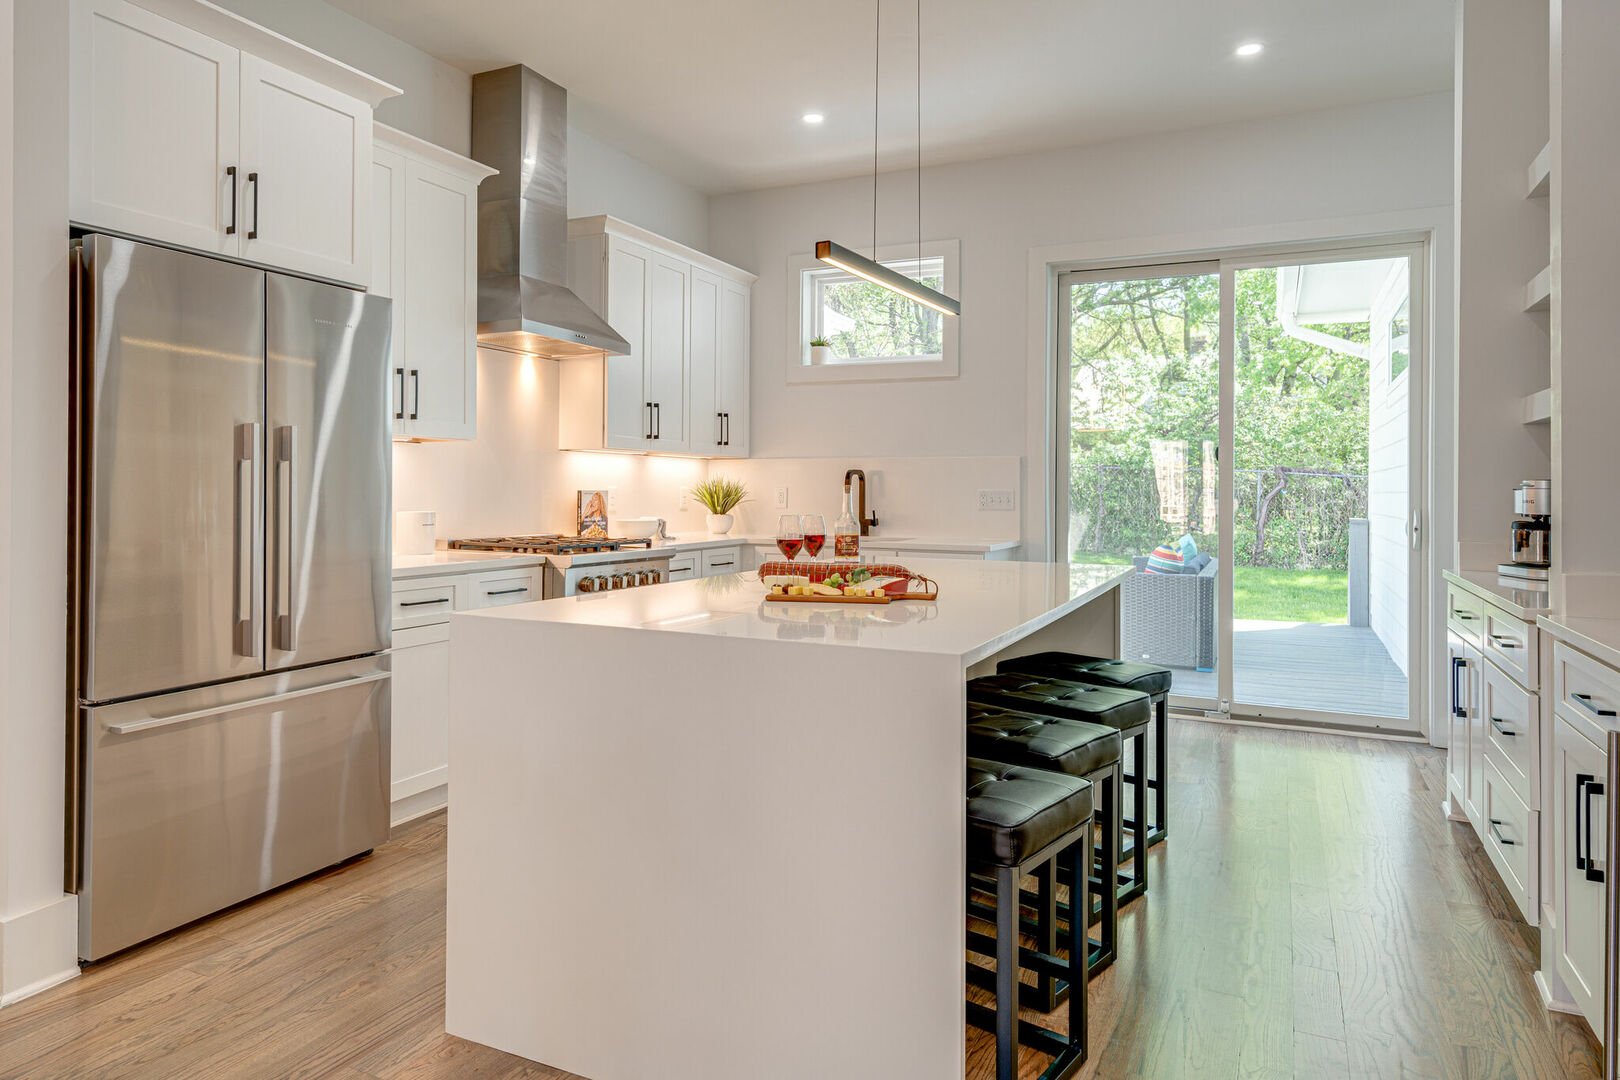 1st Floor: Gourmet style kitchen featuring all stainless steel appliances, coffee bar, wine fridge, breakfast bar, and formal dining area that seats 6.